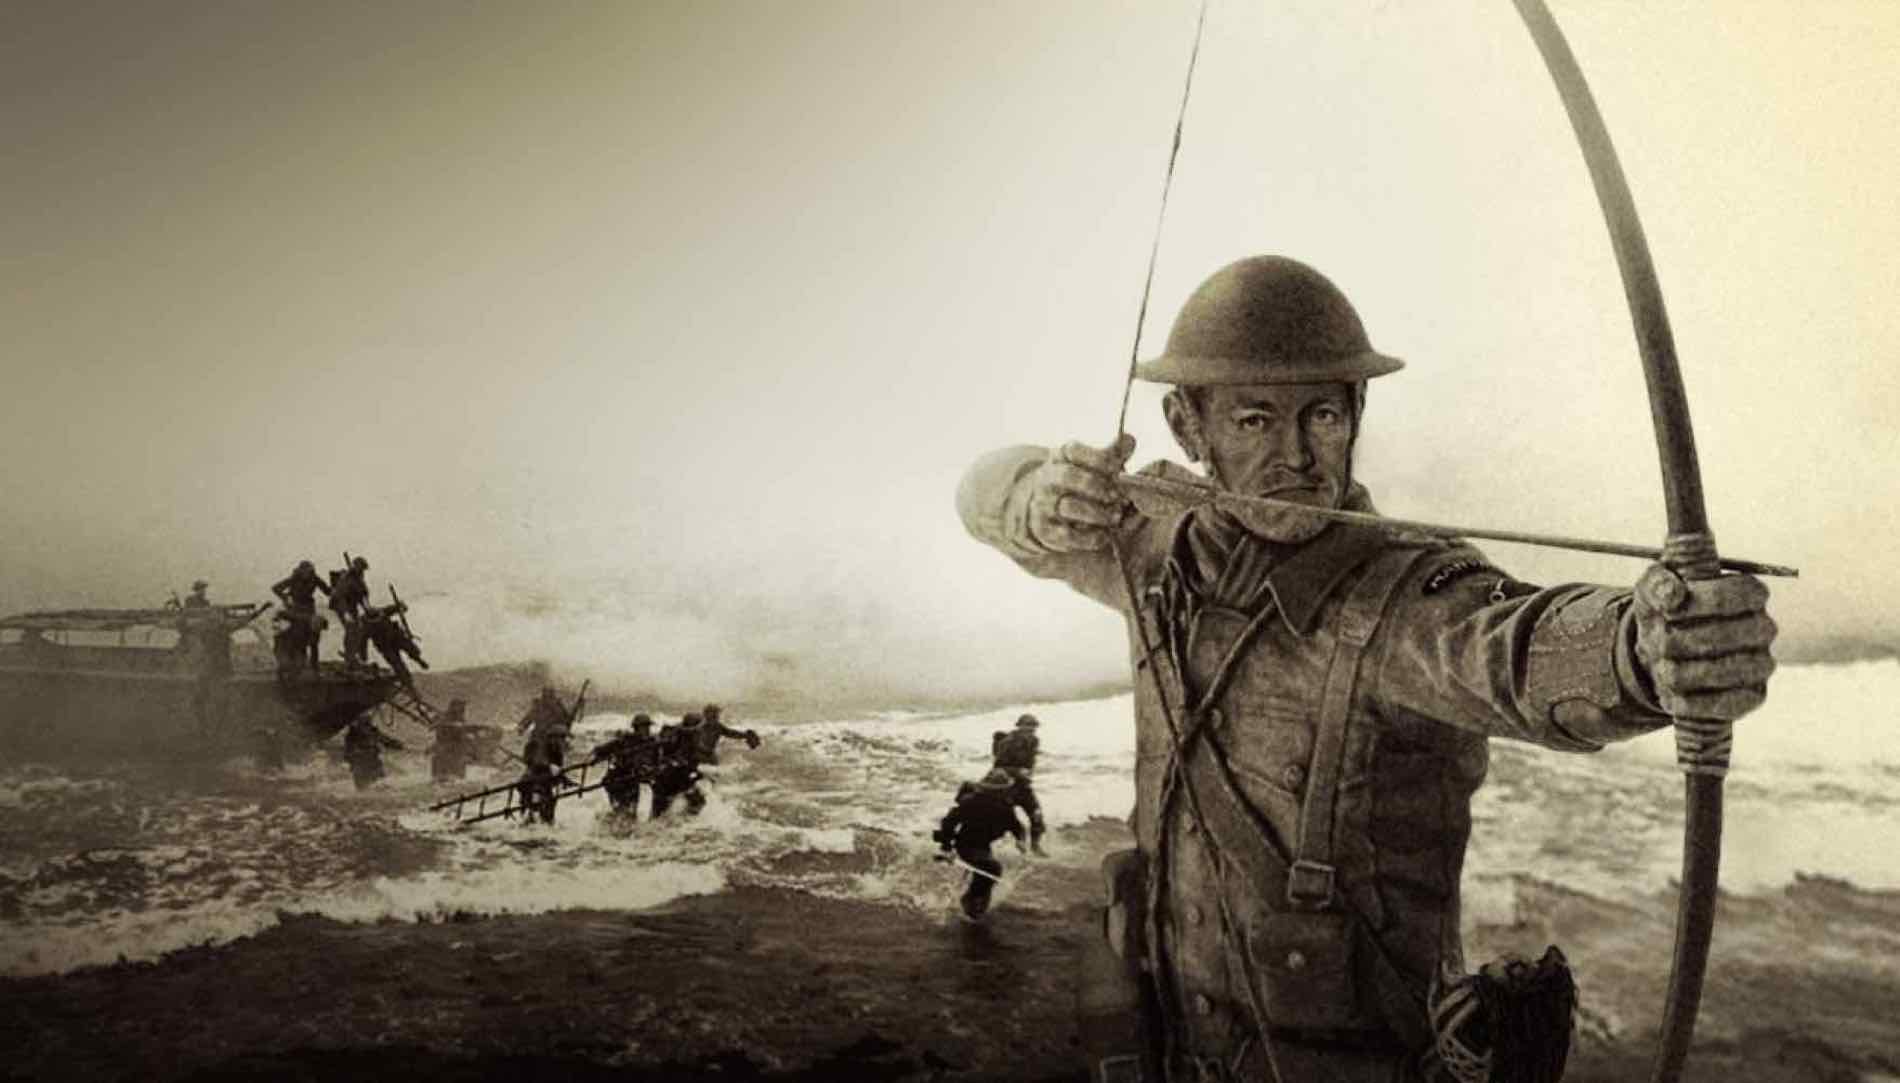 Absurd Historical Events - The last known kill by bow and arrow in combat was actually during the battle of Dunkirk